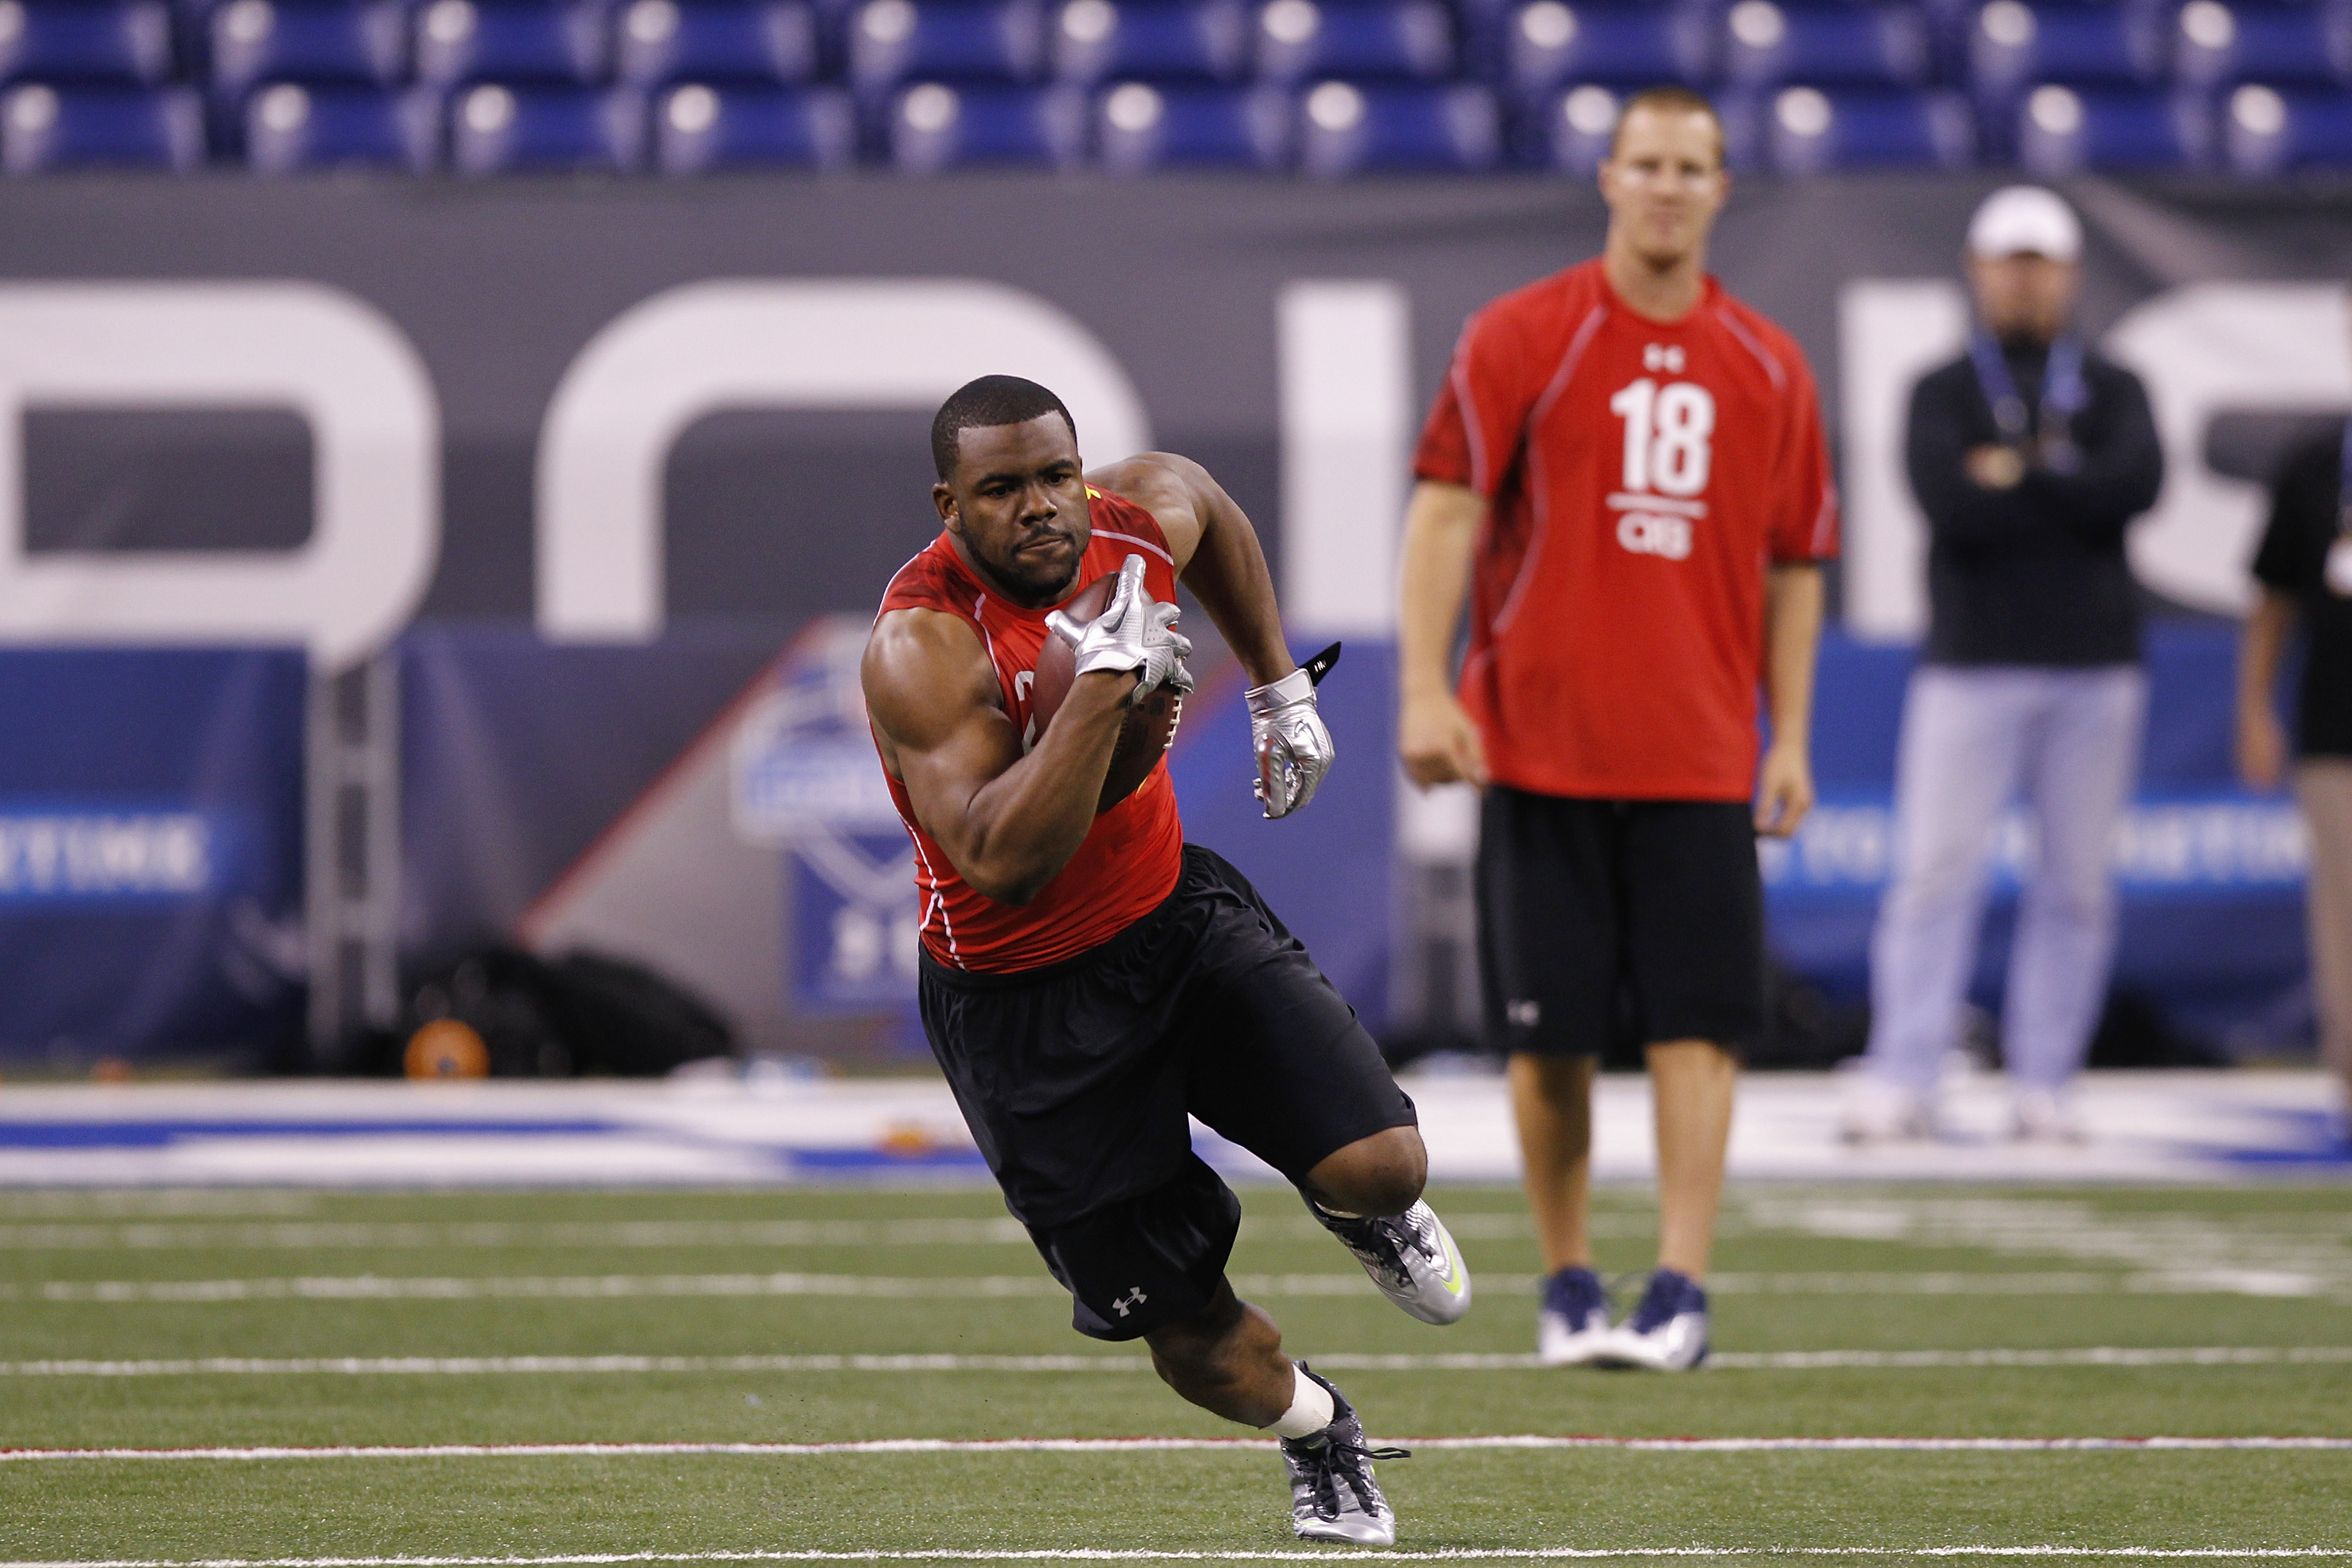 INDIANAPOLIS, IN - FEBRUARY 27: Running back Mark Ingram of Alabama runs with the ball during the 2011 NFL Scouting Combine at Lucas Oil Stadium on February 27, 2011 in Indianapolis, Indiana. (Photo by Joe Robbins/Getty Images)